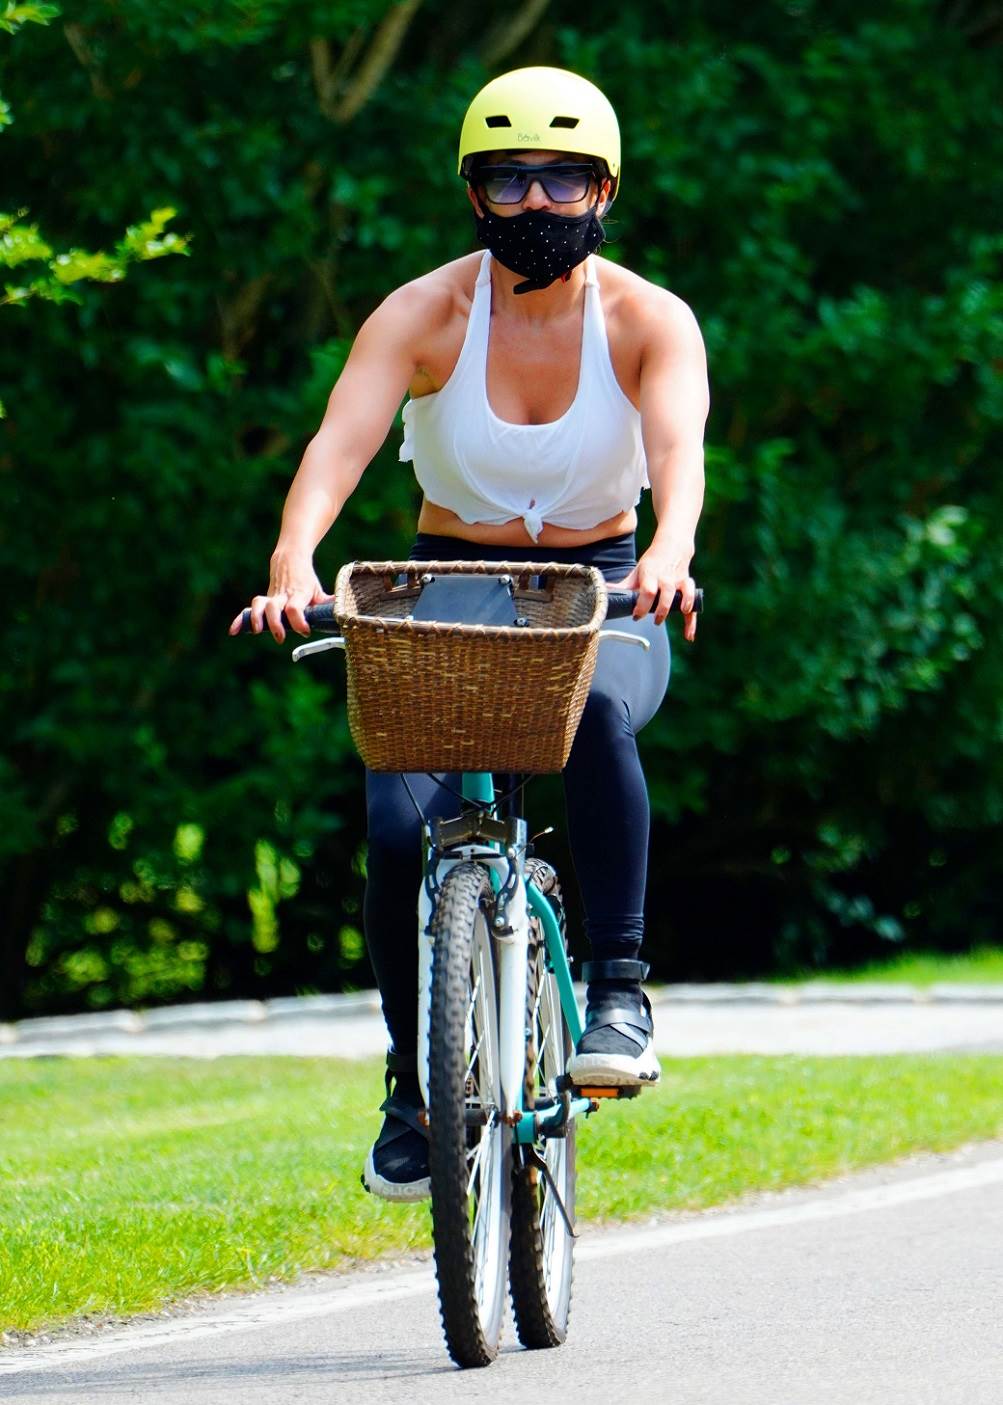  07/23/2020 Jennifer Lopez is pictured on a bike ride with a trainer ahead of her 51st birthday in The Hamptons. The pop star and actress wore a neon helmet, patterned face mask, cropped tank top, black leggings, and matching trainers.,Image: 546523374, License: Rights-managed, Restrictions: NO usage without agreed price and terms. Please contact sales@theimagedirect.com, Model Release: no, Credit line: TheImageDirect.com / The Image Direct / Profimedia 